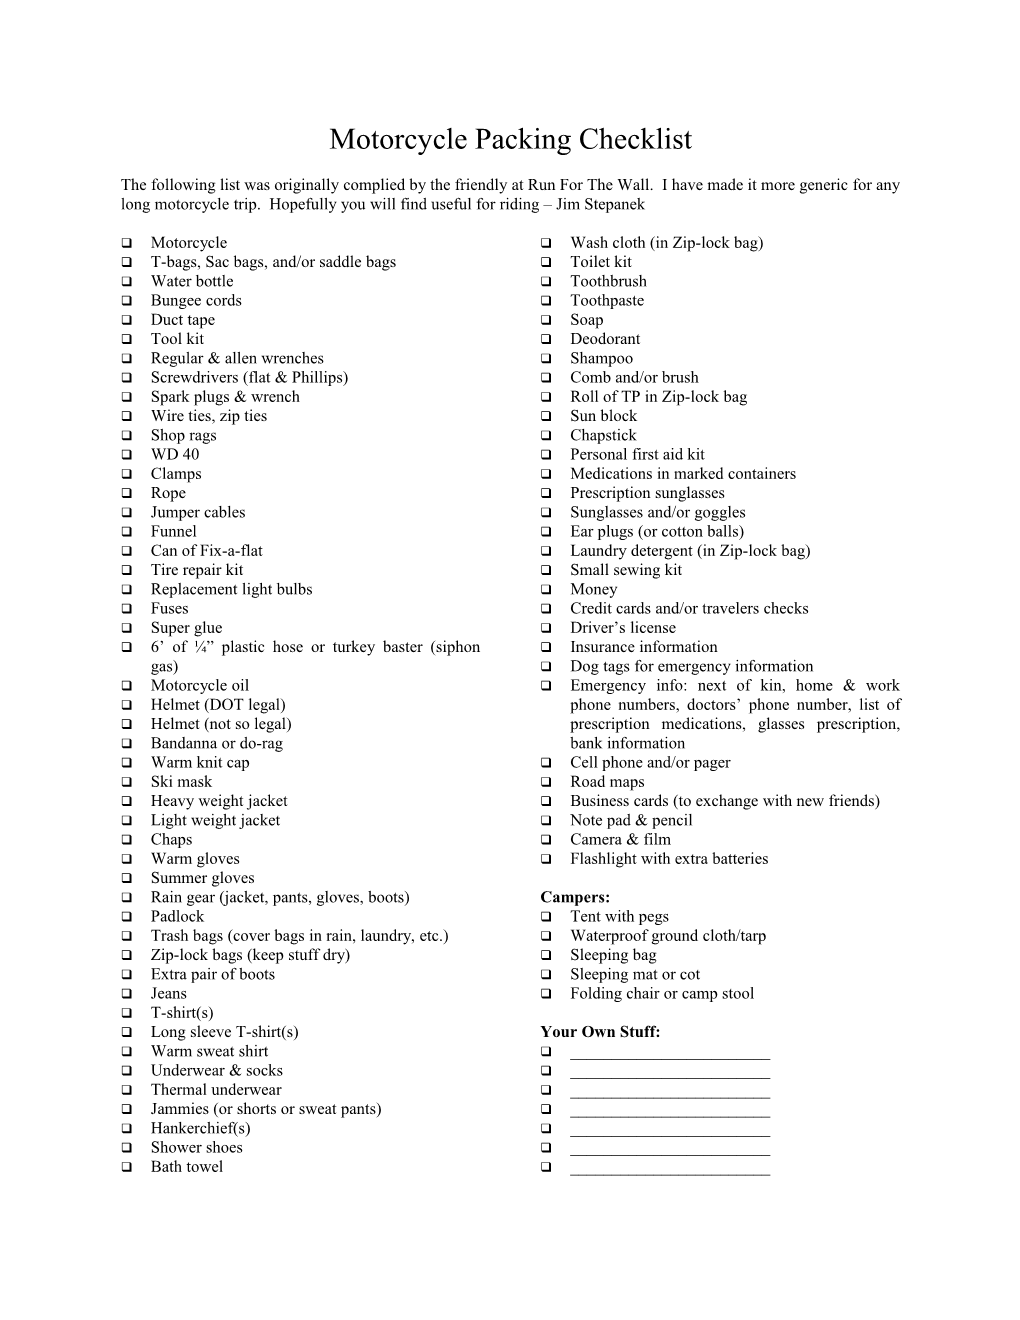 Motorcycle Packing Checklist